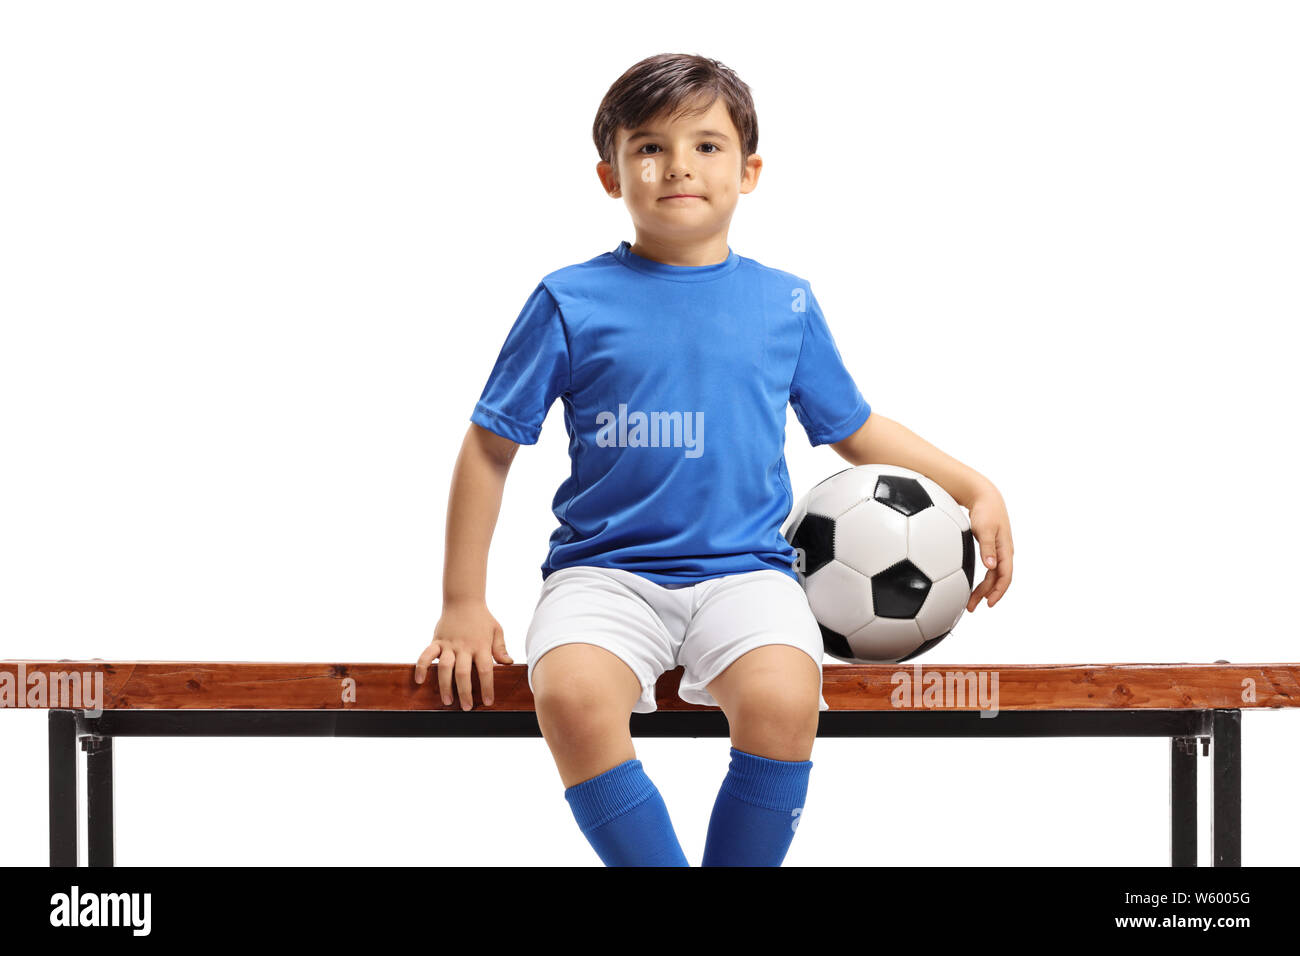 Boy with football sitting on a bench isolated on white background Stock Photo